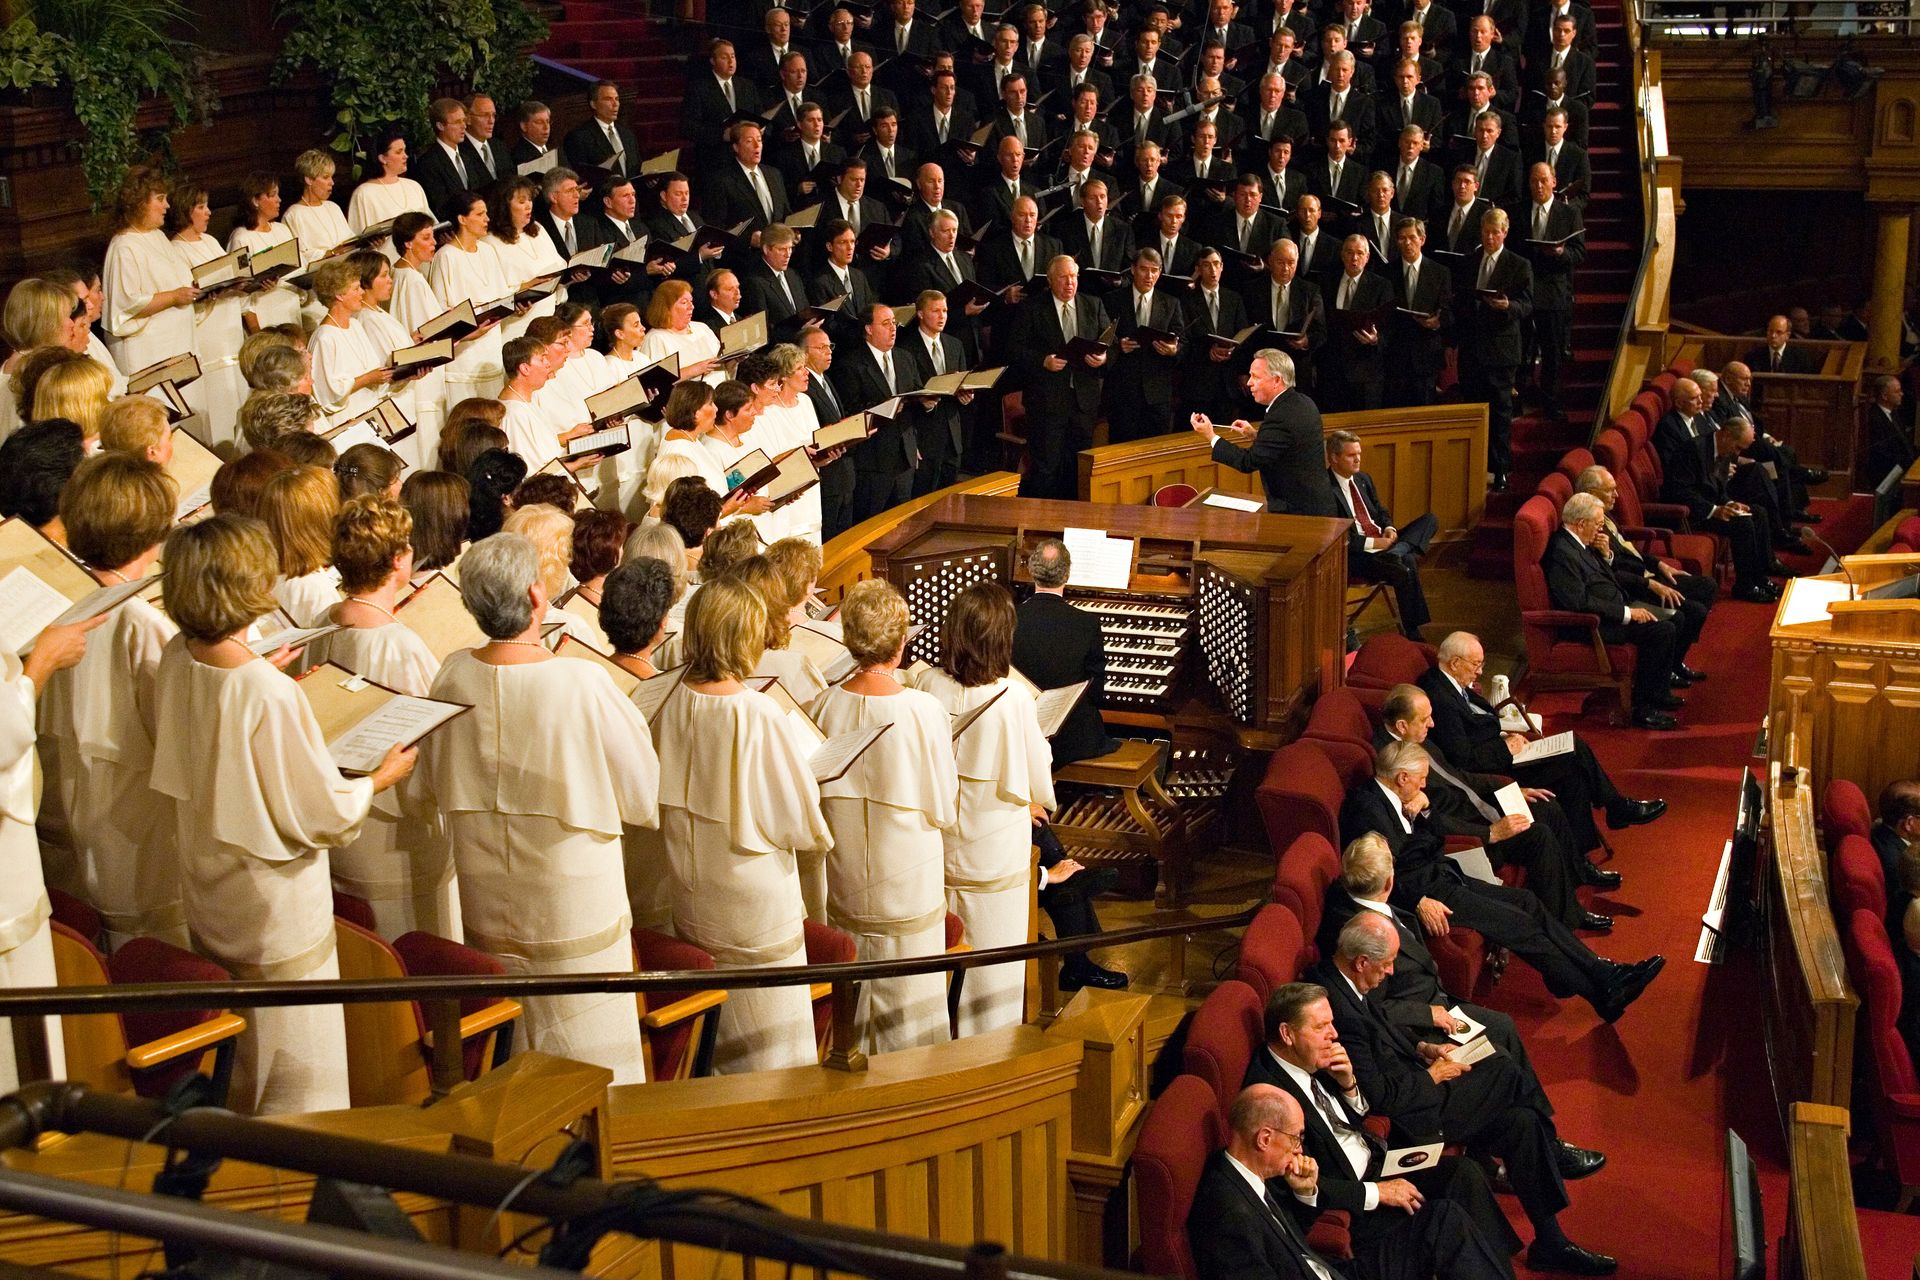 The Mormon Tabernacle Choir performs in the Tabernacle.